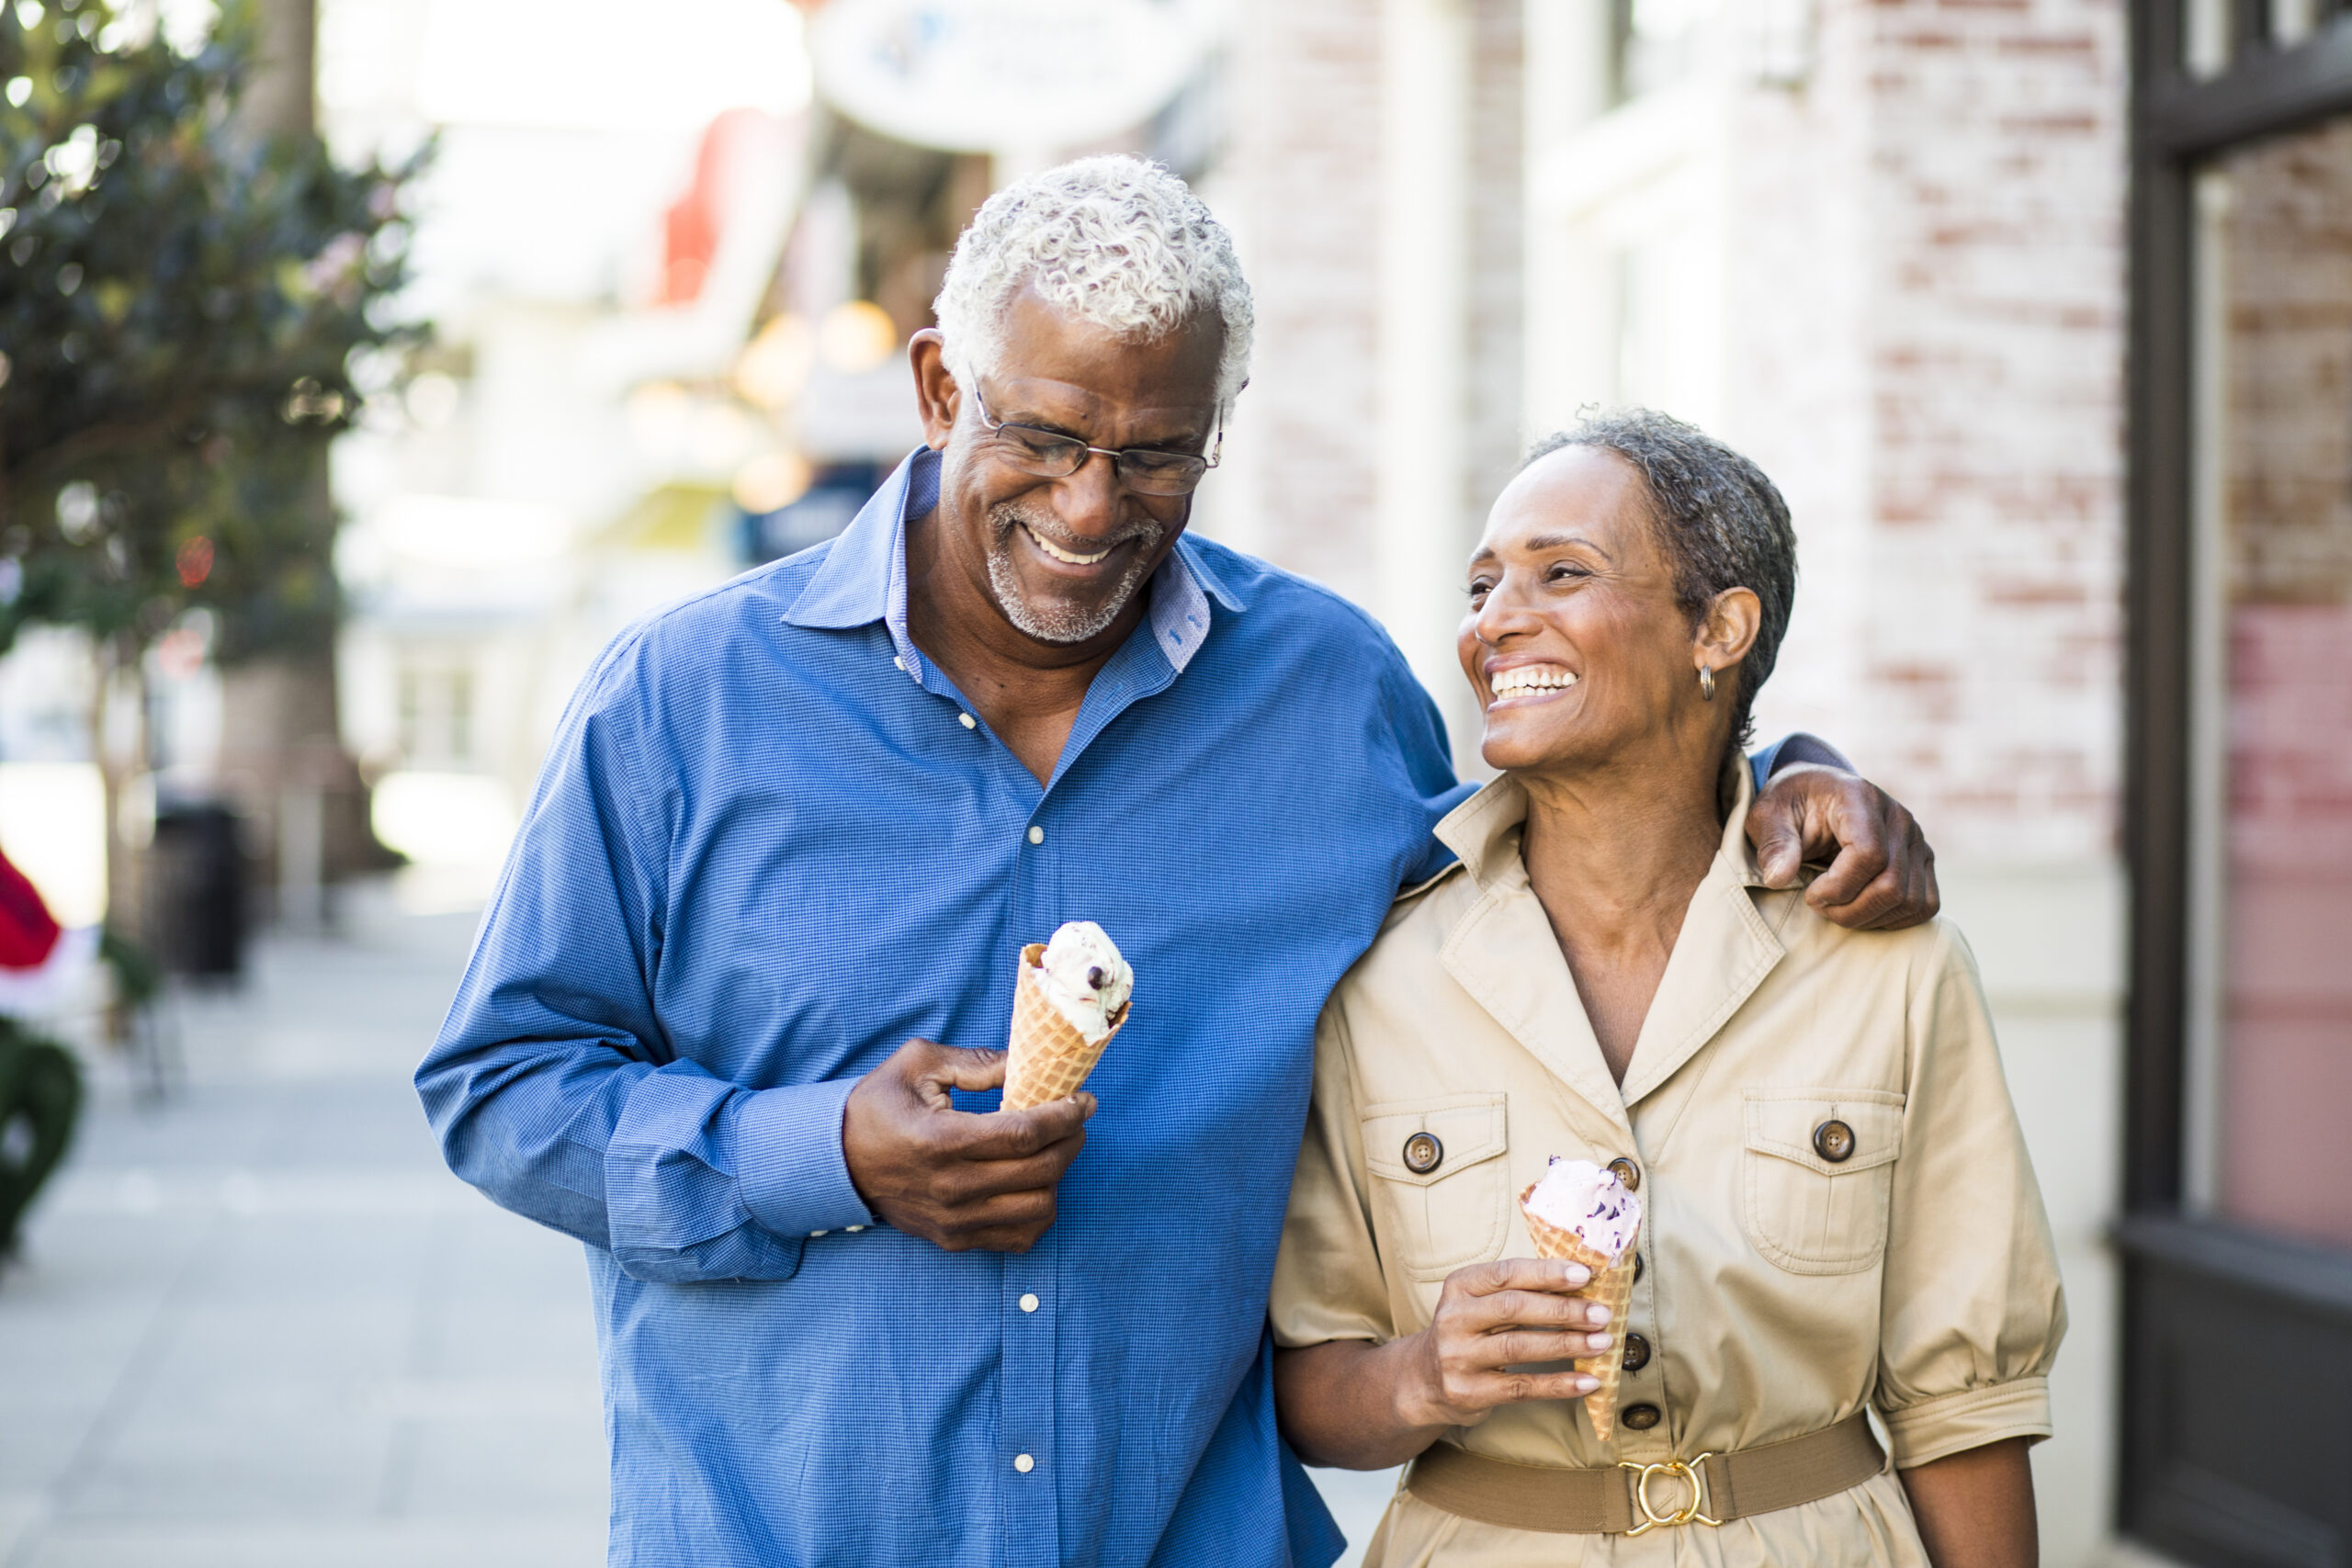 5 Great Tips for Dating as a Senior